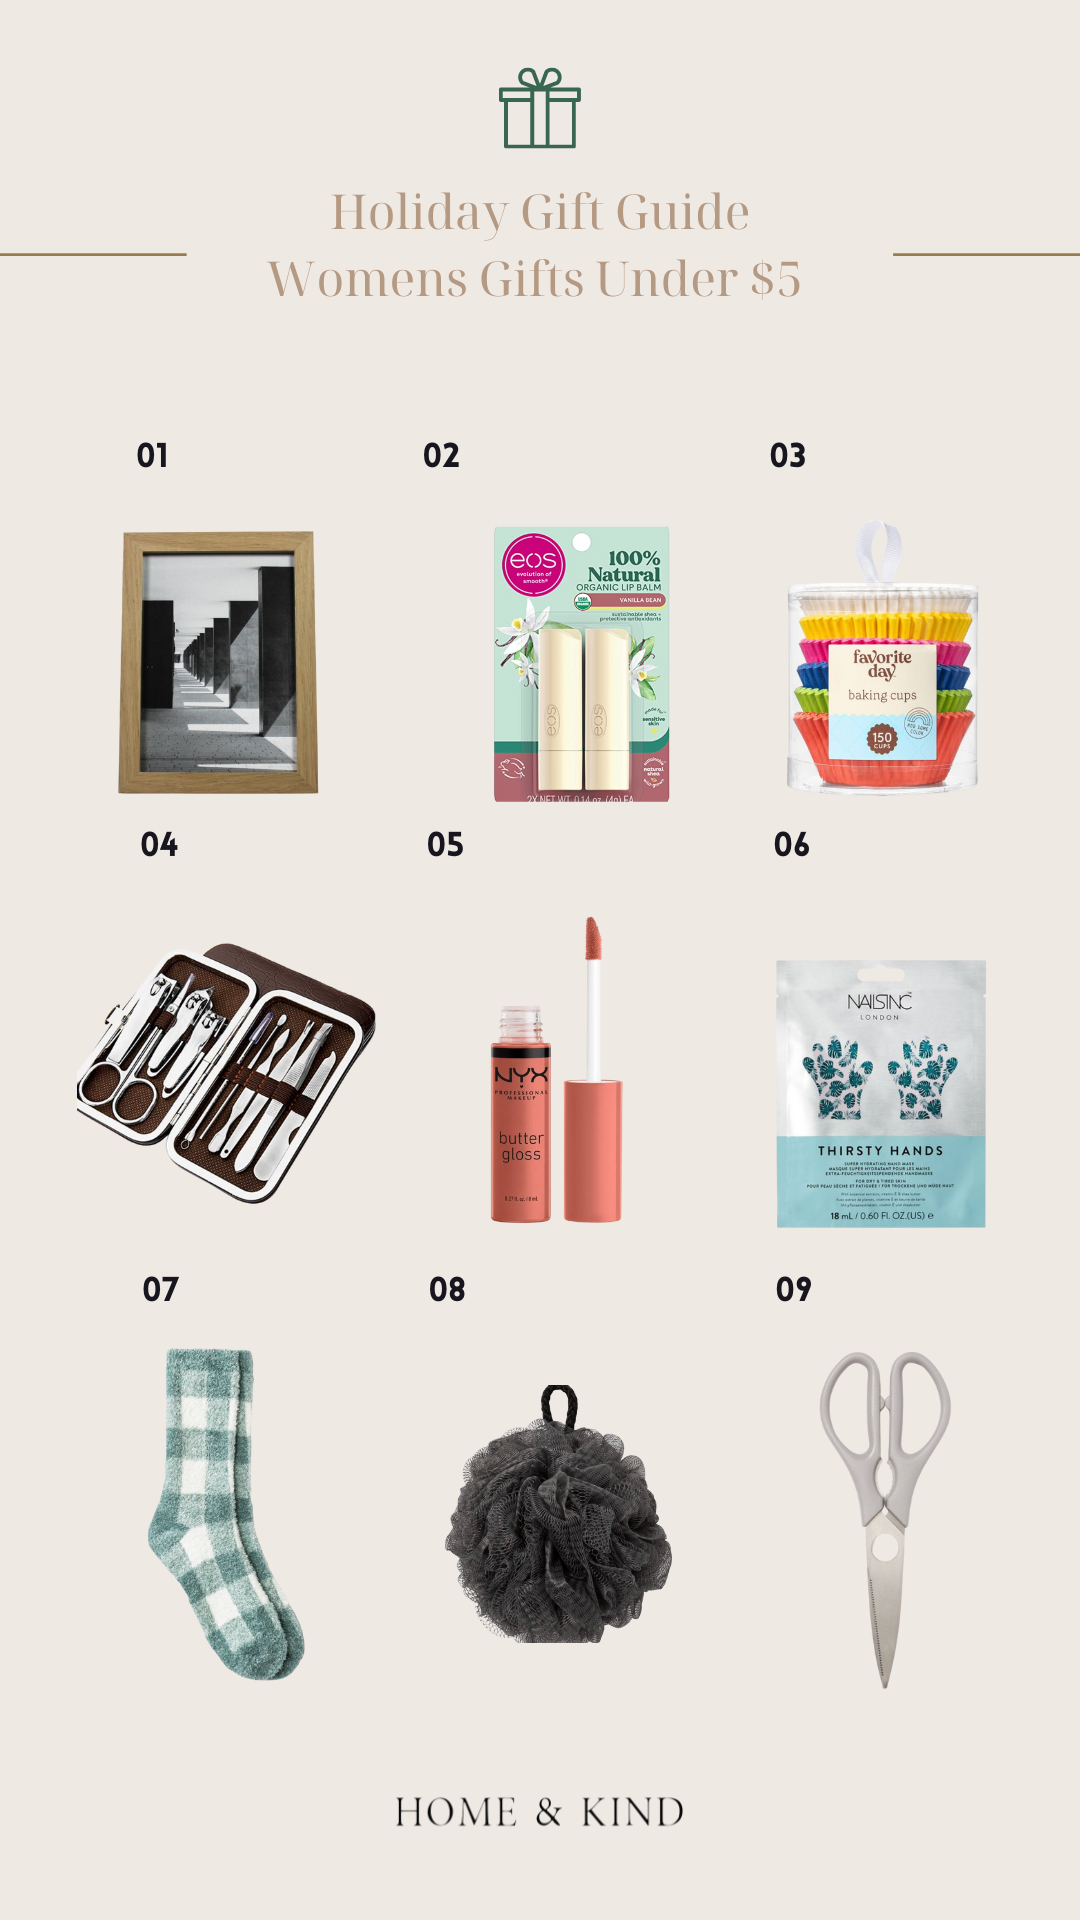 https://homeandkind.com/wp-content/uploads/2022/11/Holiday-Gift-Guide-Womens-under-5.png